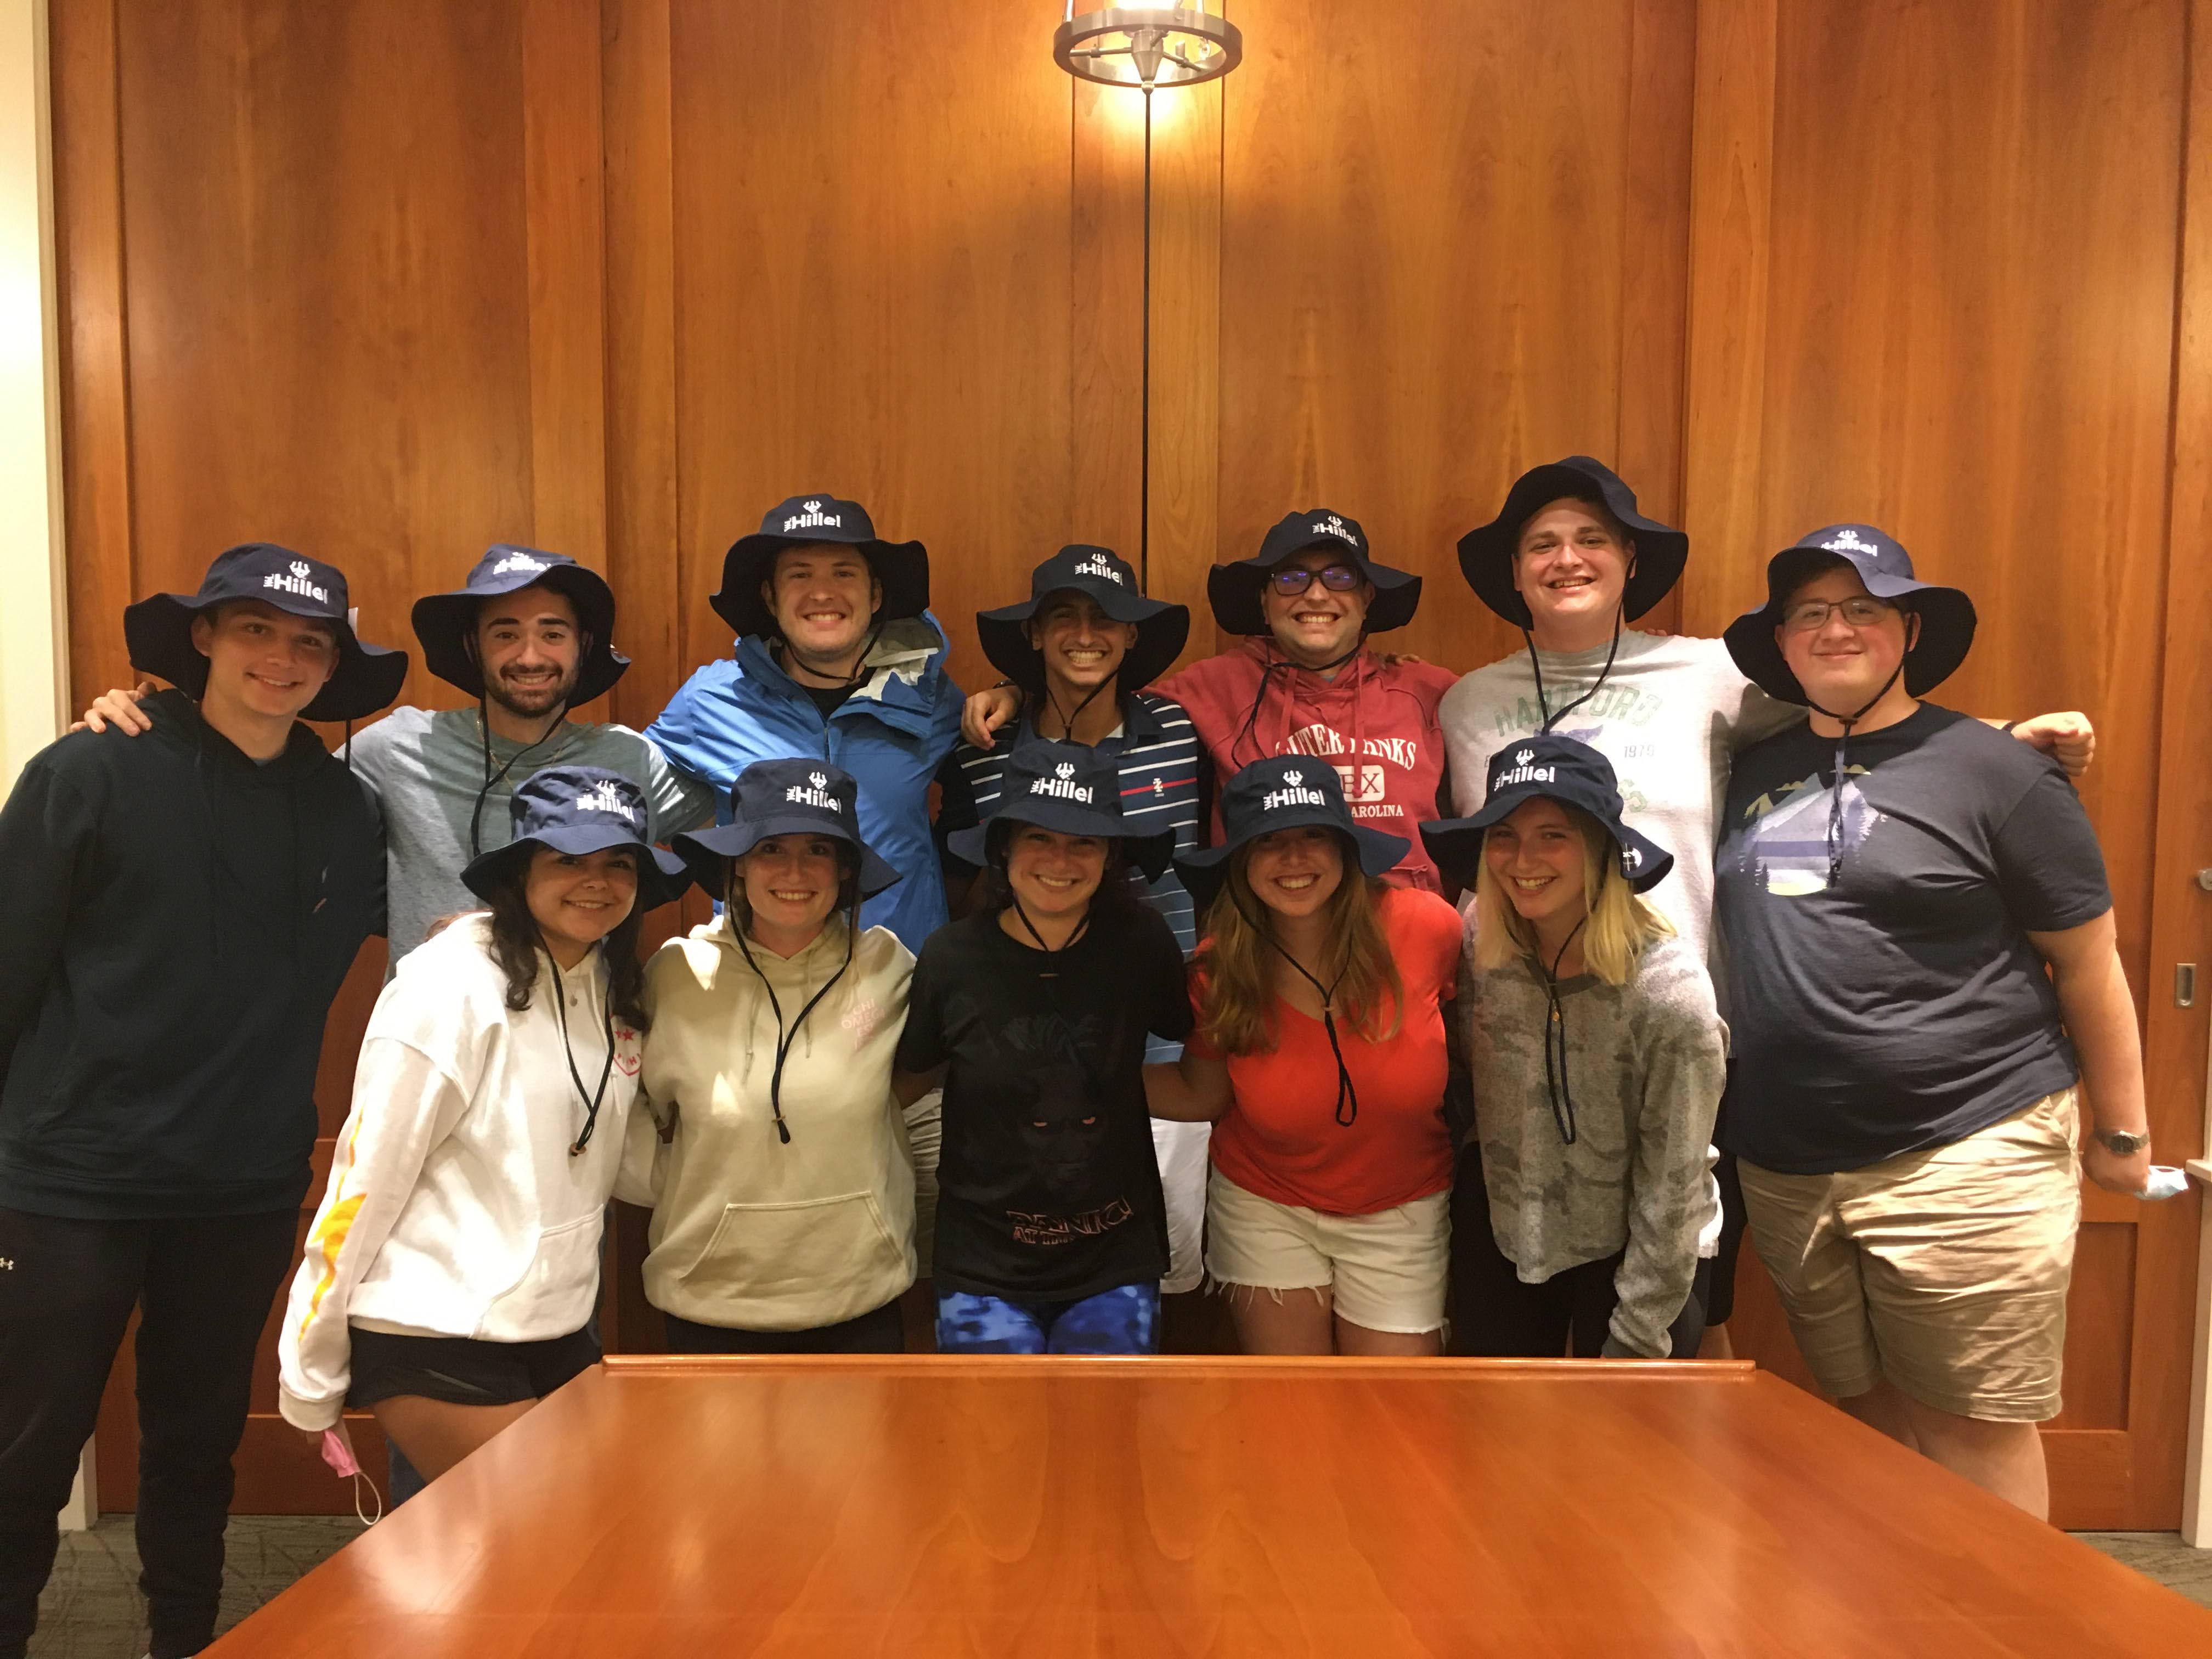 Hillel Student Board receives their yearly board gift of bucket hats.